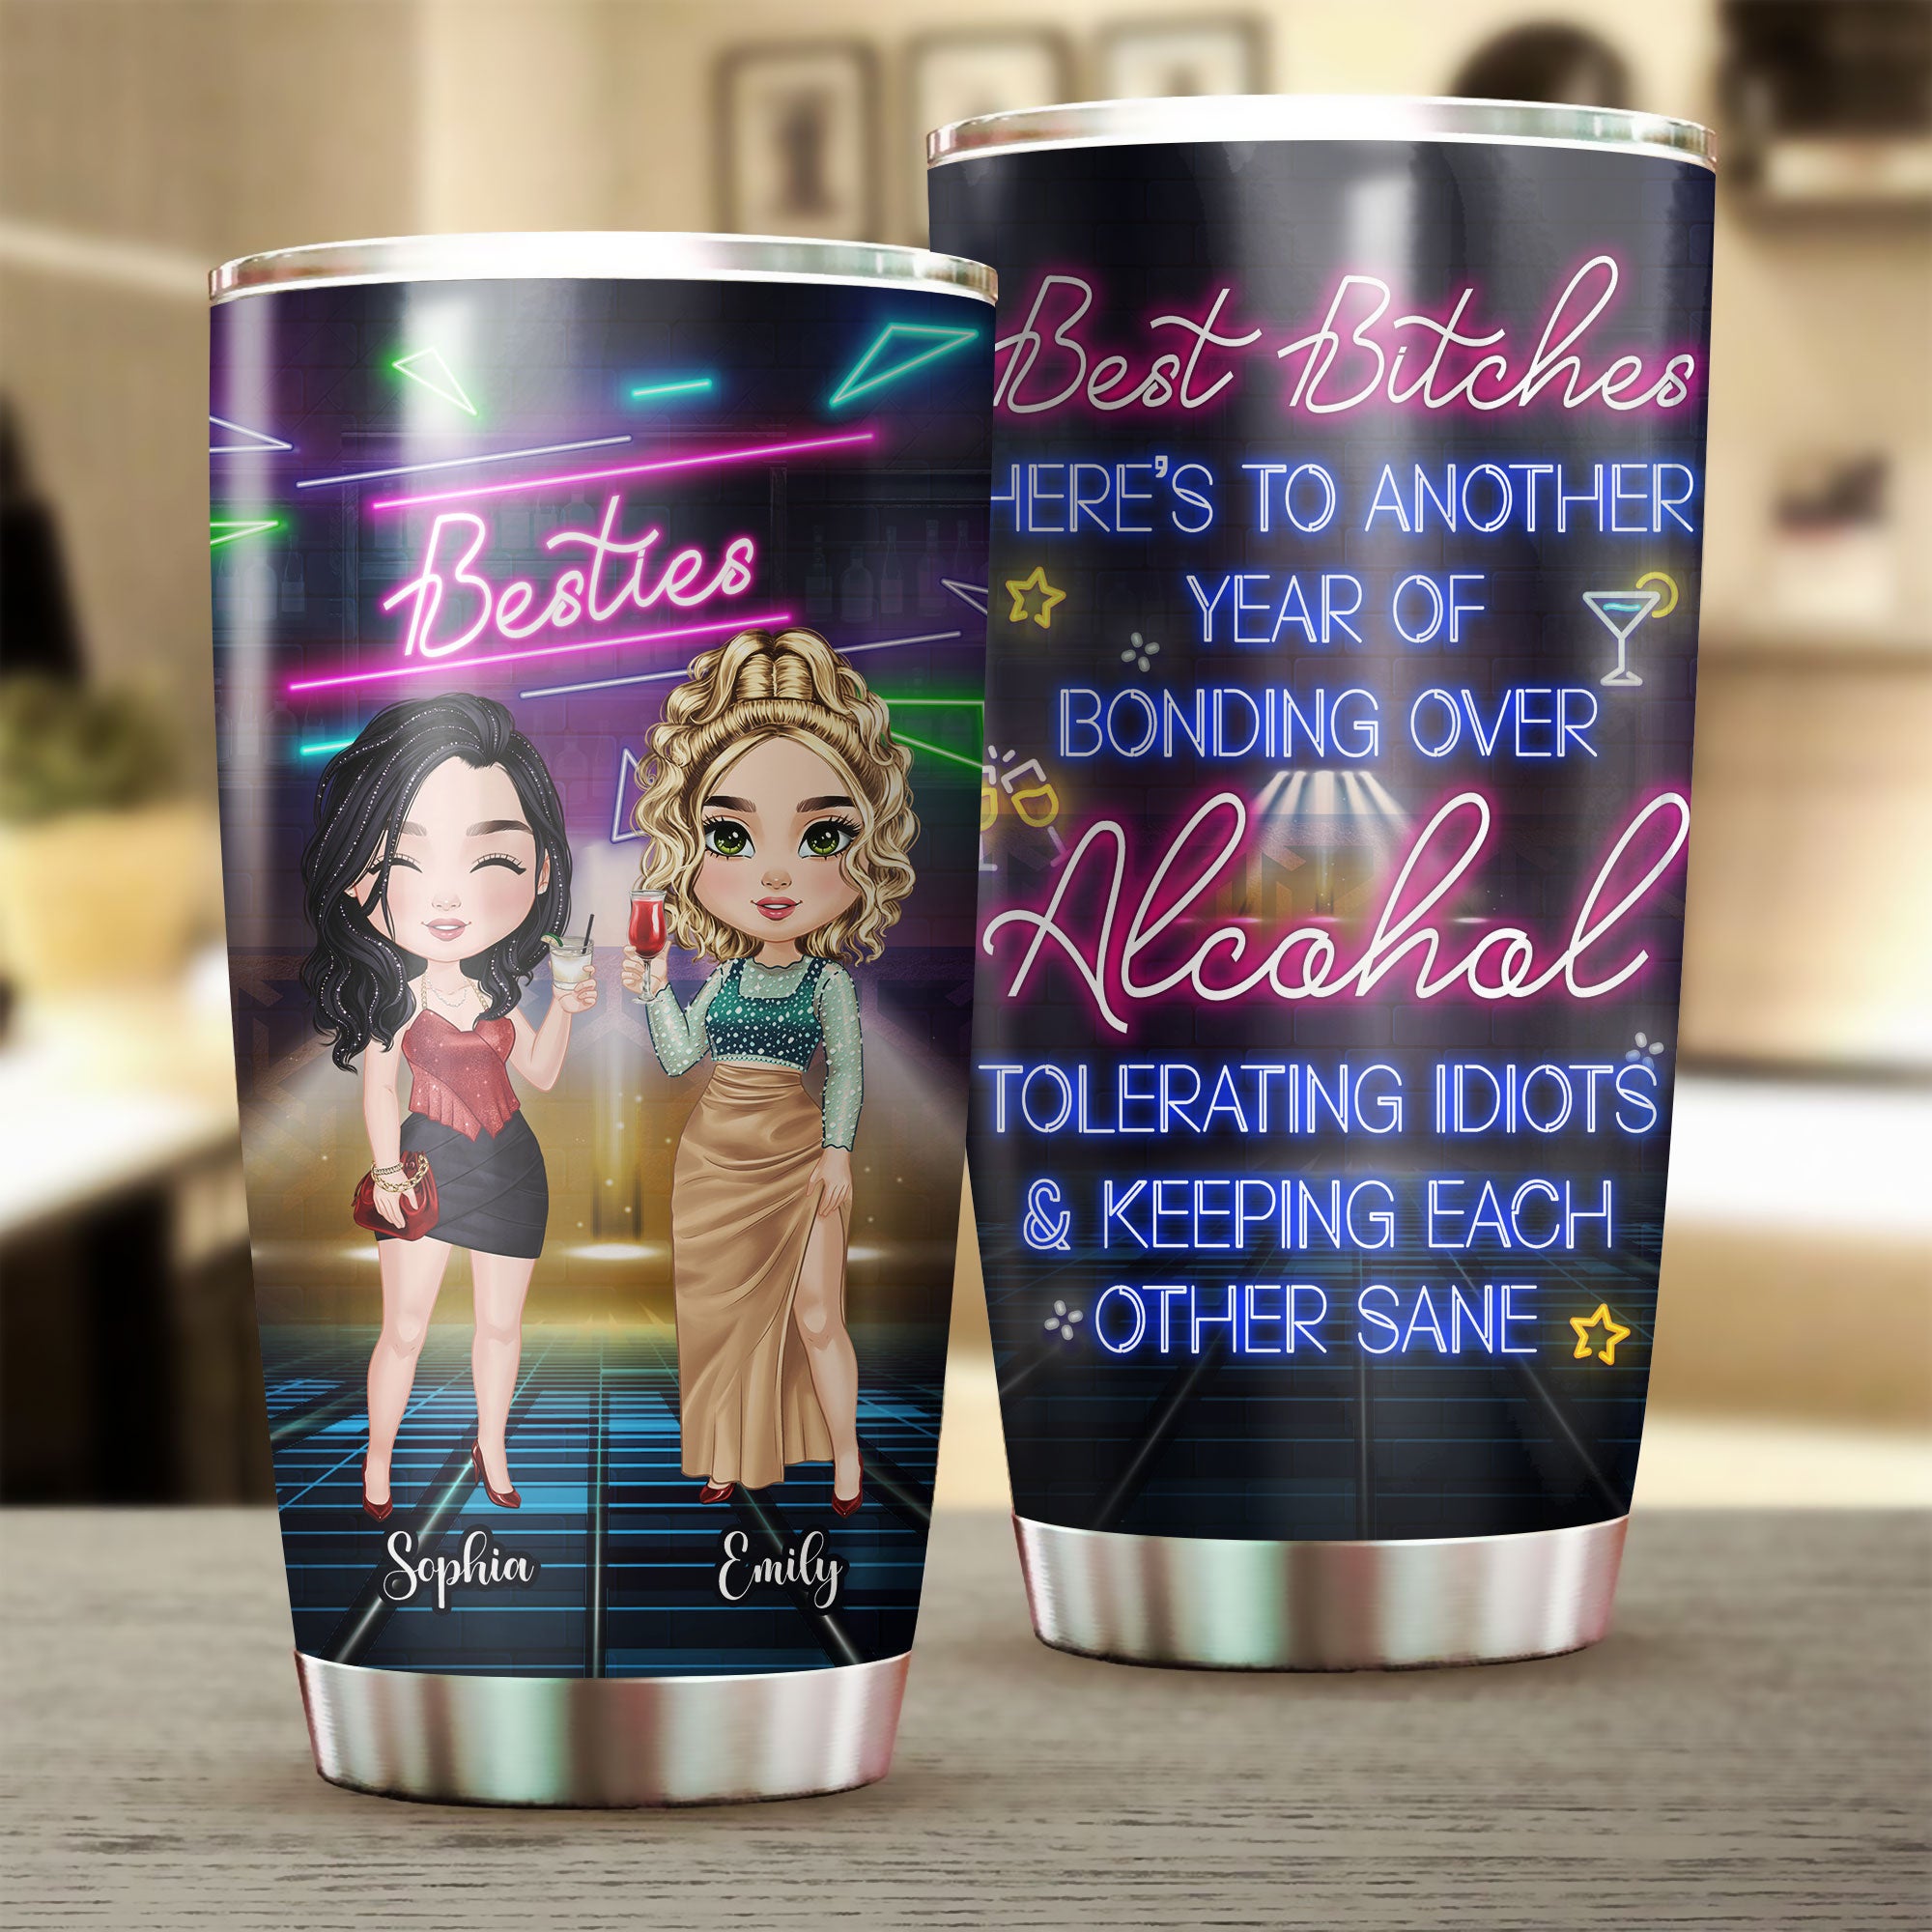 Best Bitches Here's To Another Year Of Bonding Over Alcohol Tolerating Idiots & Keeping Each Other Sane, Personalized Besties Tumbler, Gift For Best Friend